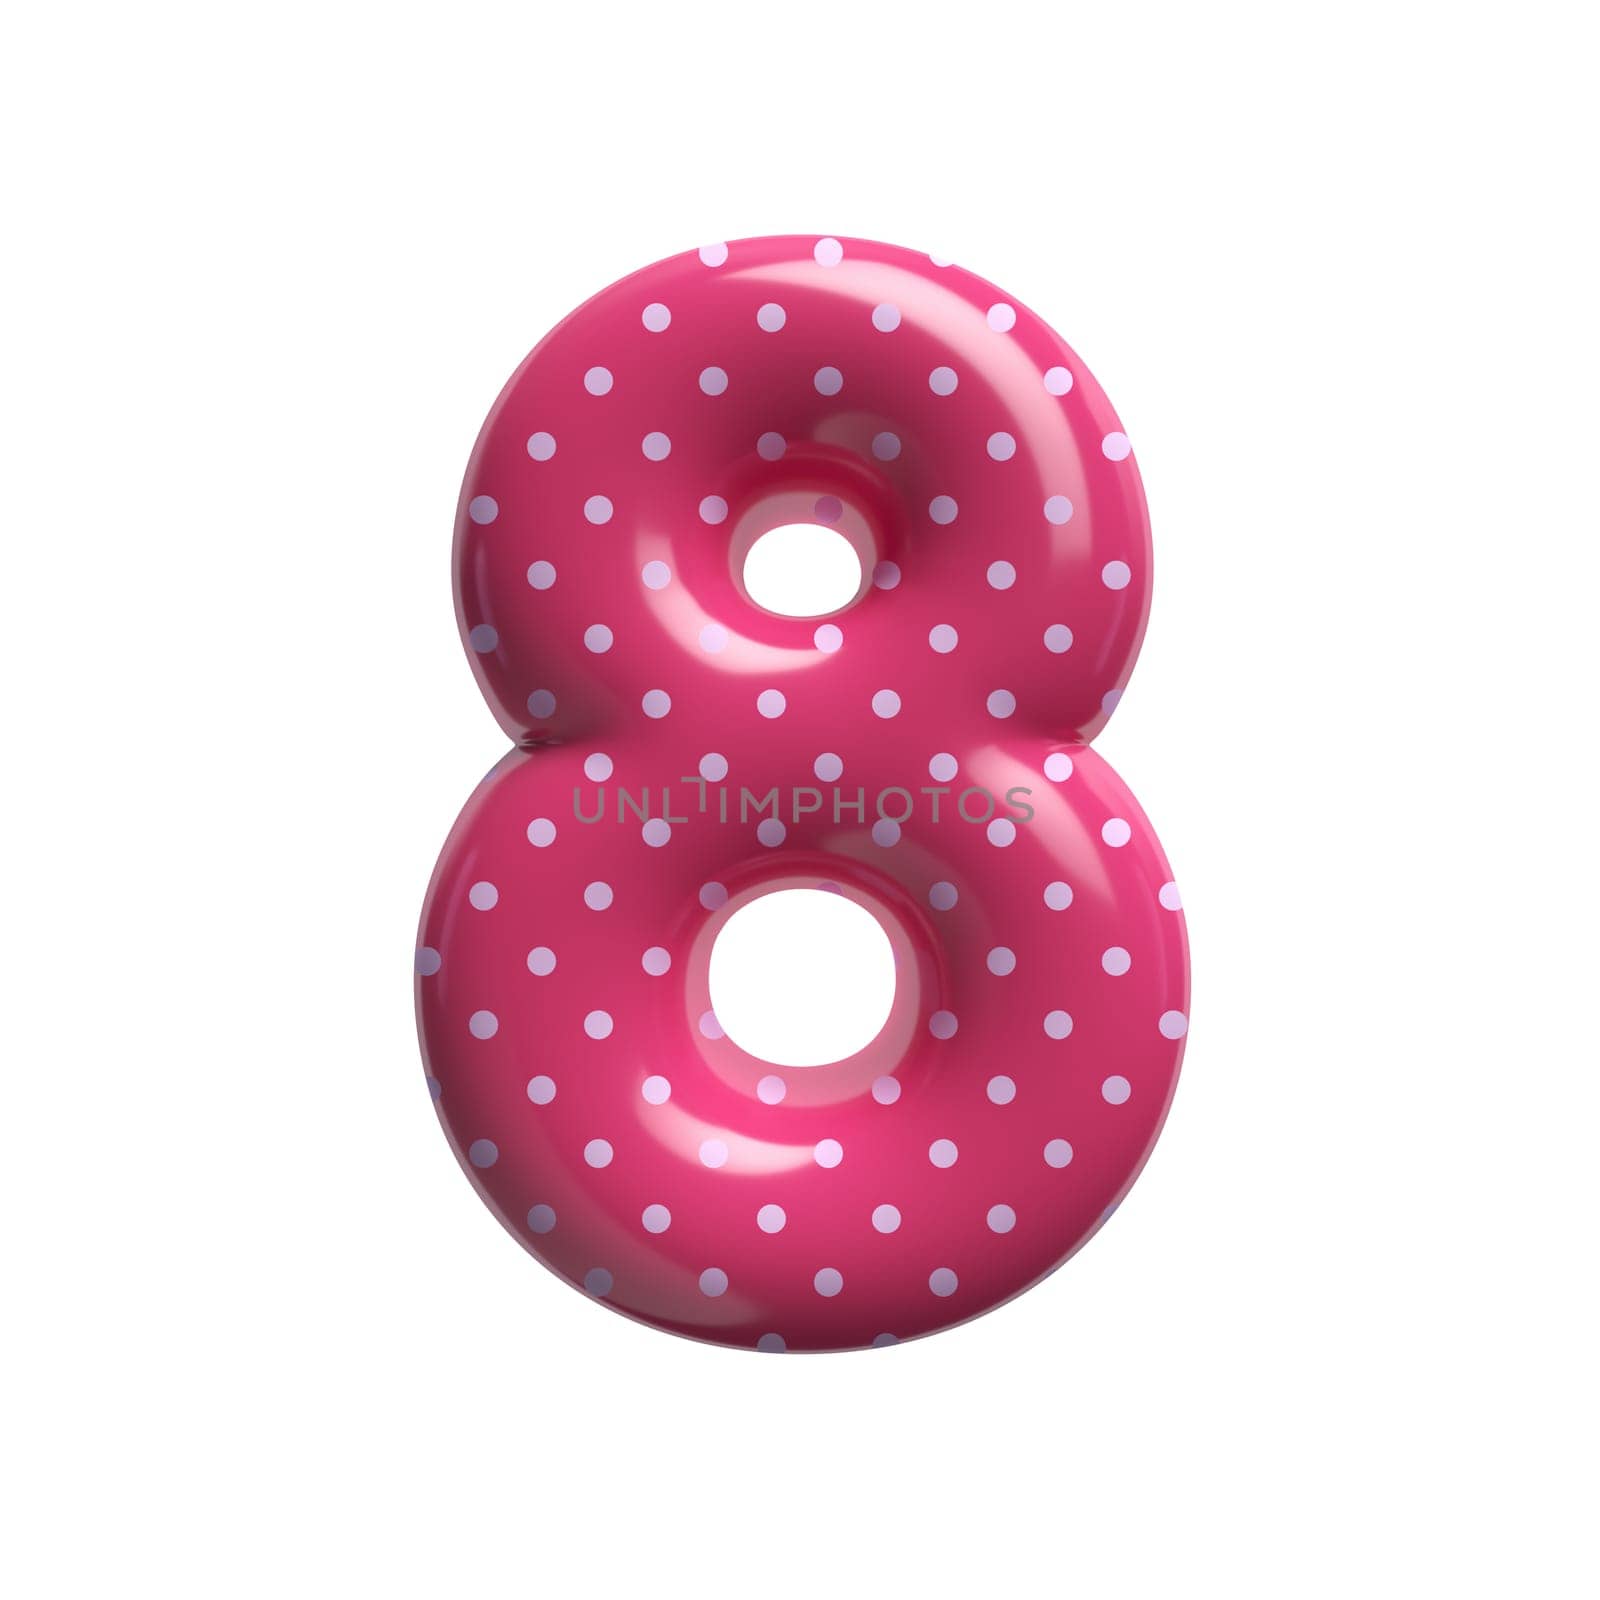 Polka dot number 8 - 3d pink retro digit - Suitable for Fashion, retro design or decoration related subjects by chrisroll